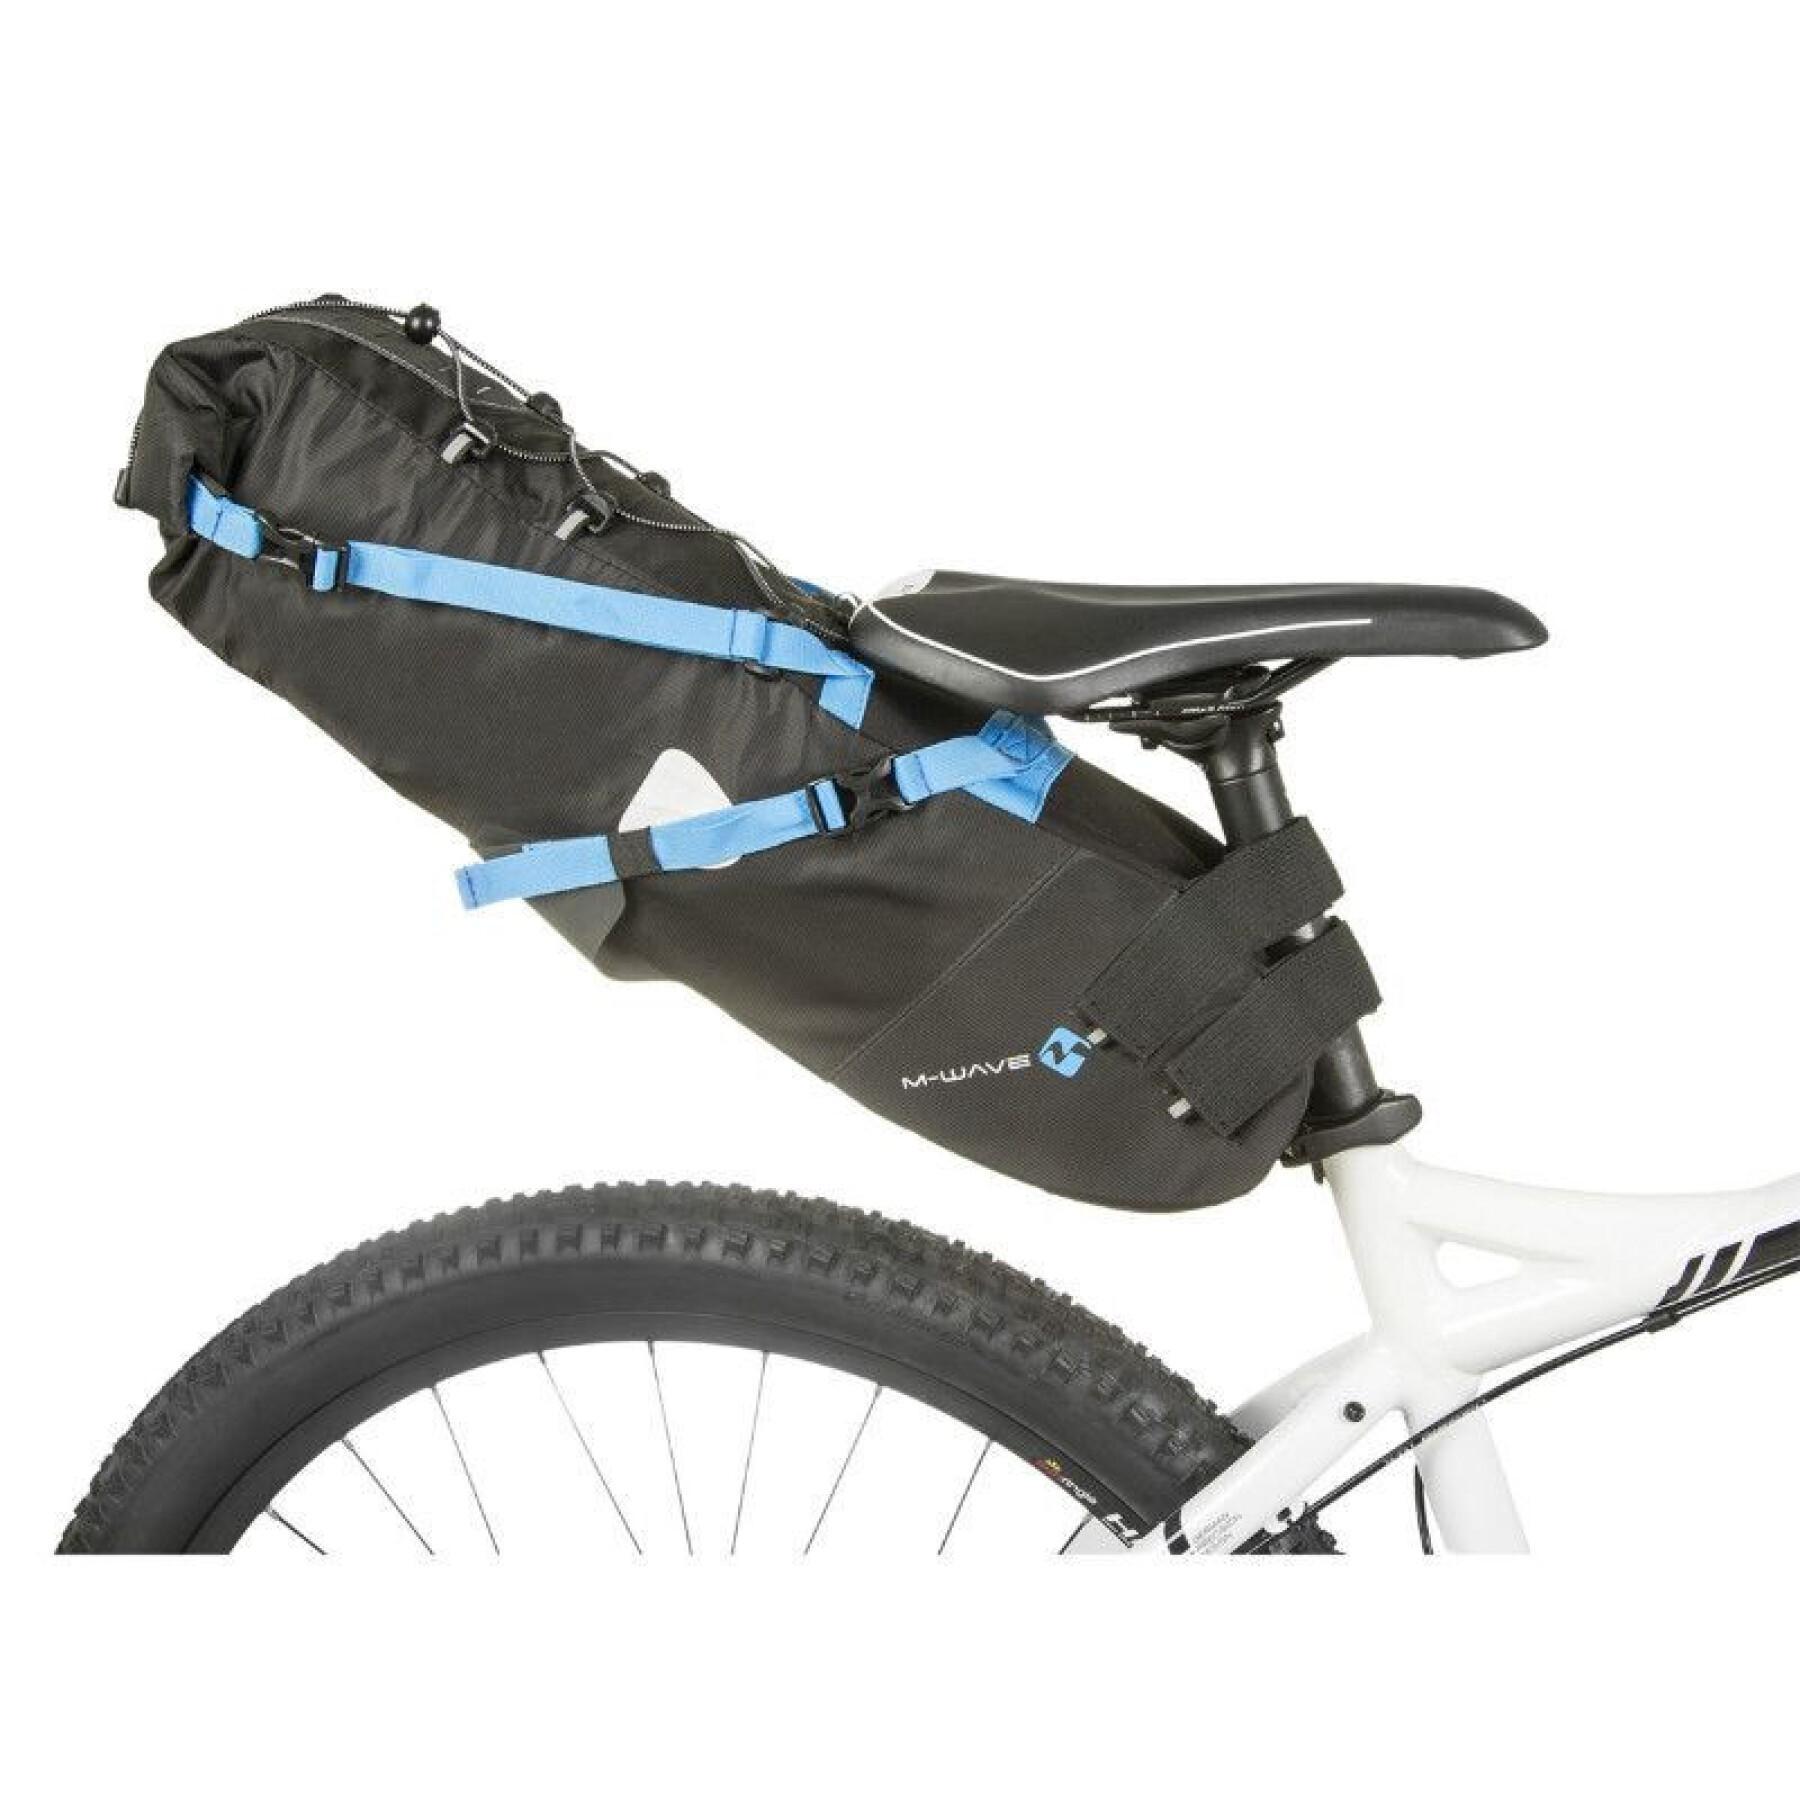 Waterproof bicycle saddle bag with velcro fastening P2R 50 x 15 x 15 cm 5kgs